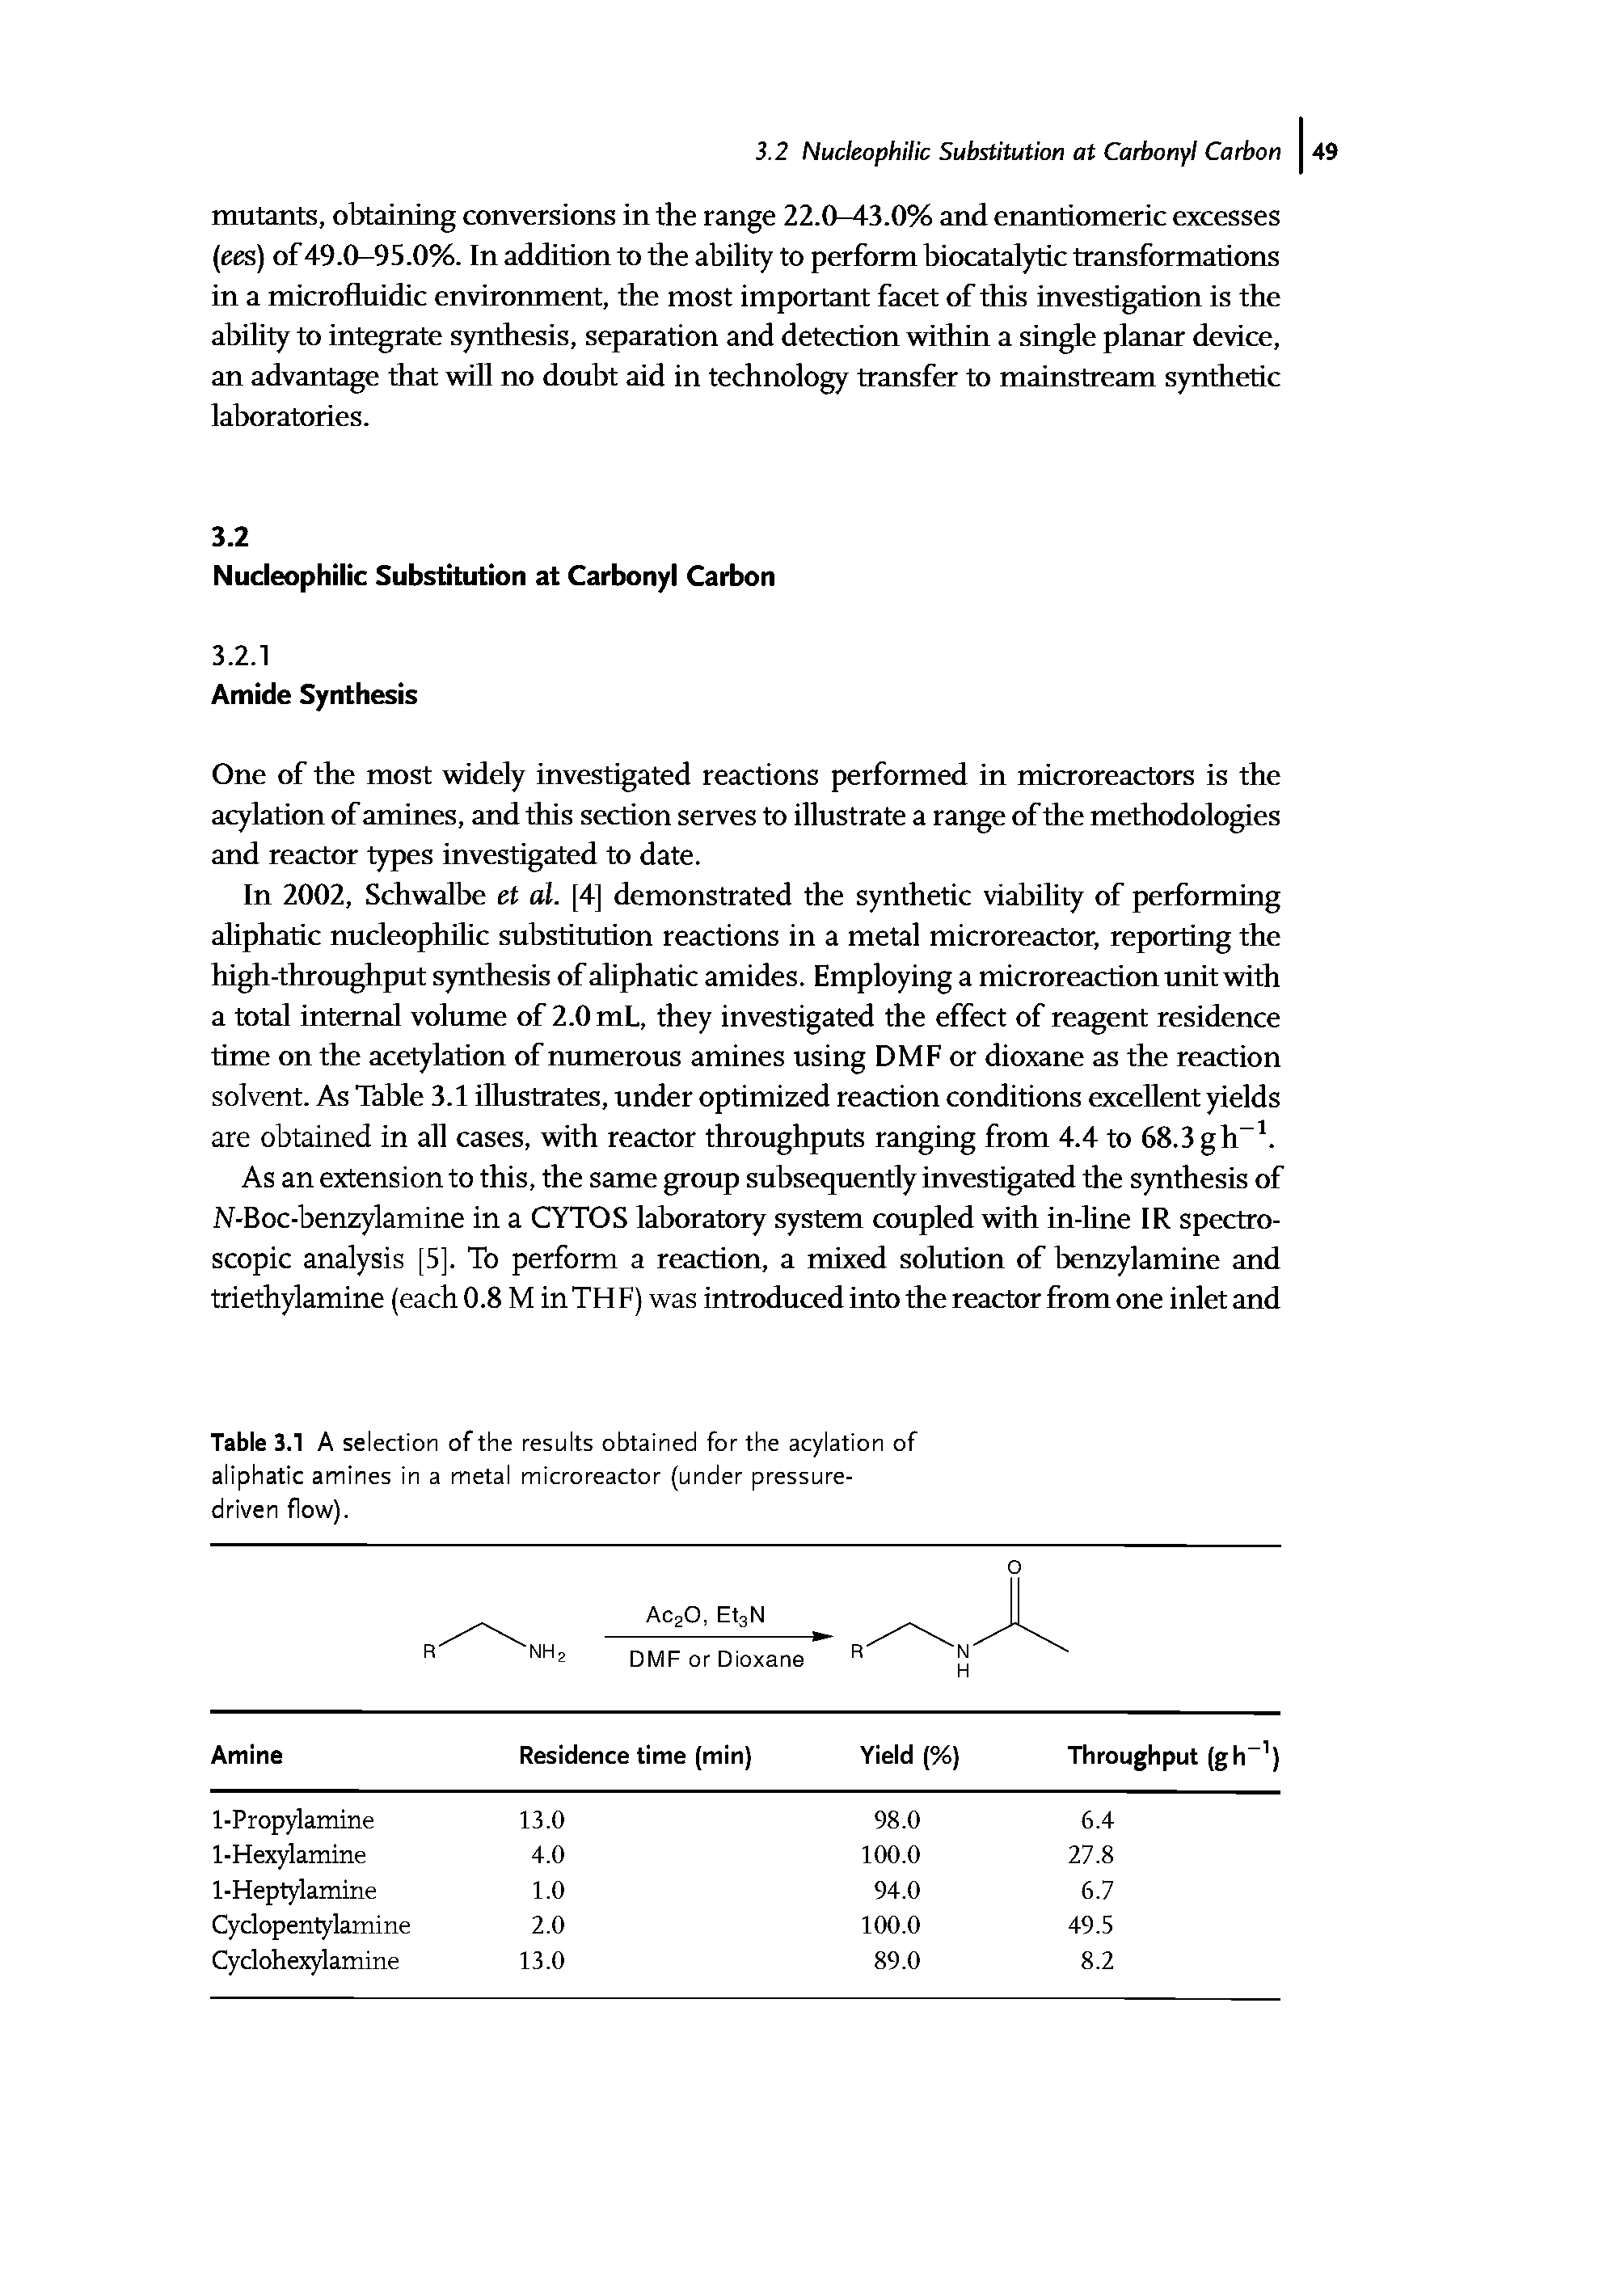 Table 3.1 A selection of the results obtained for the acylation of aliphatic amines in a metal microreactor (under pressure-driven flow).